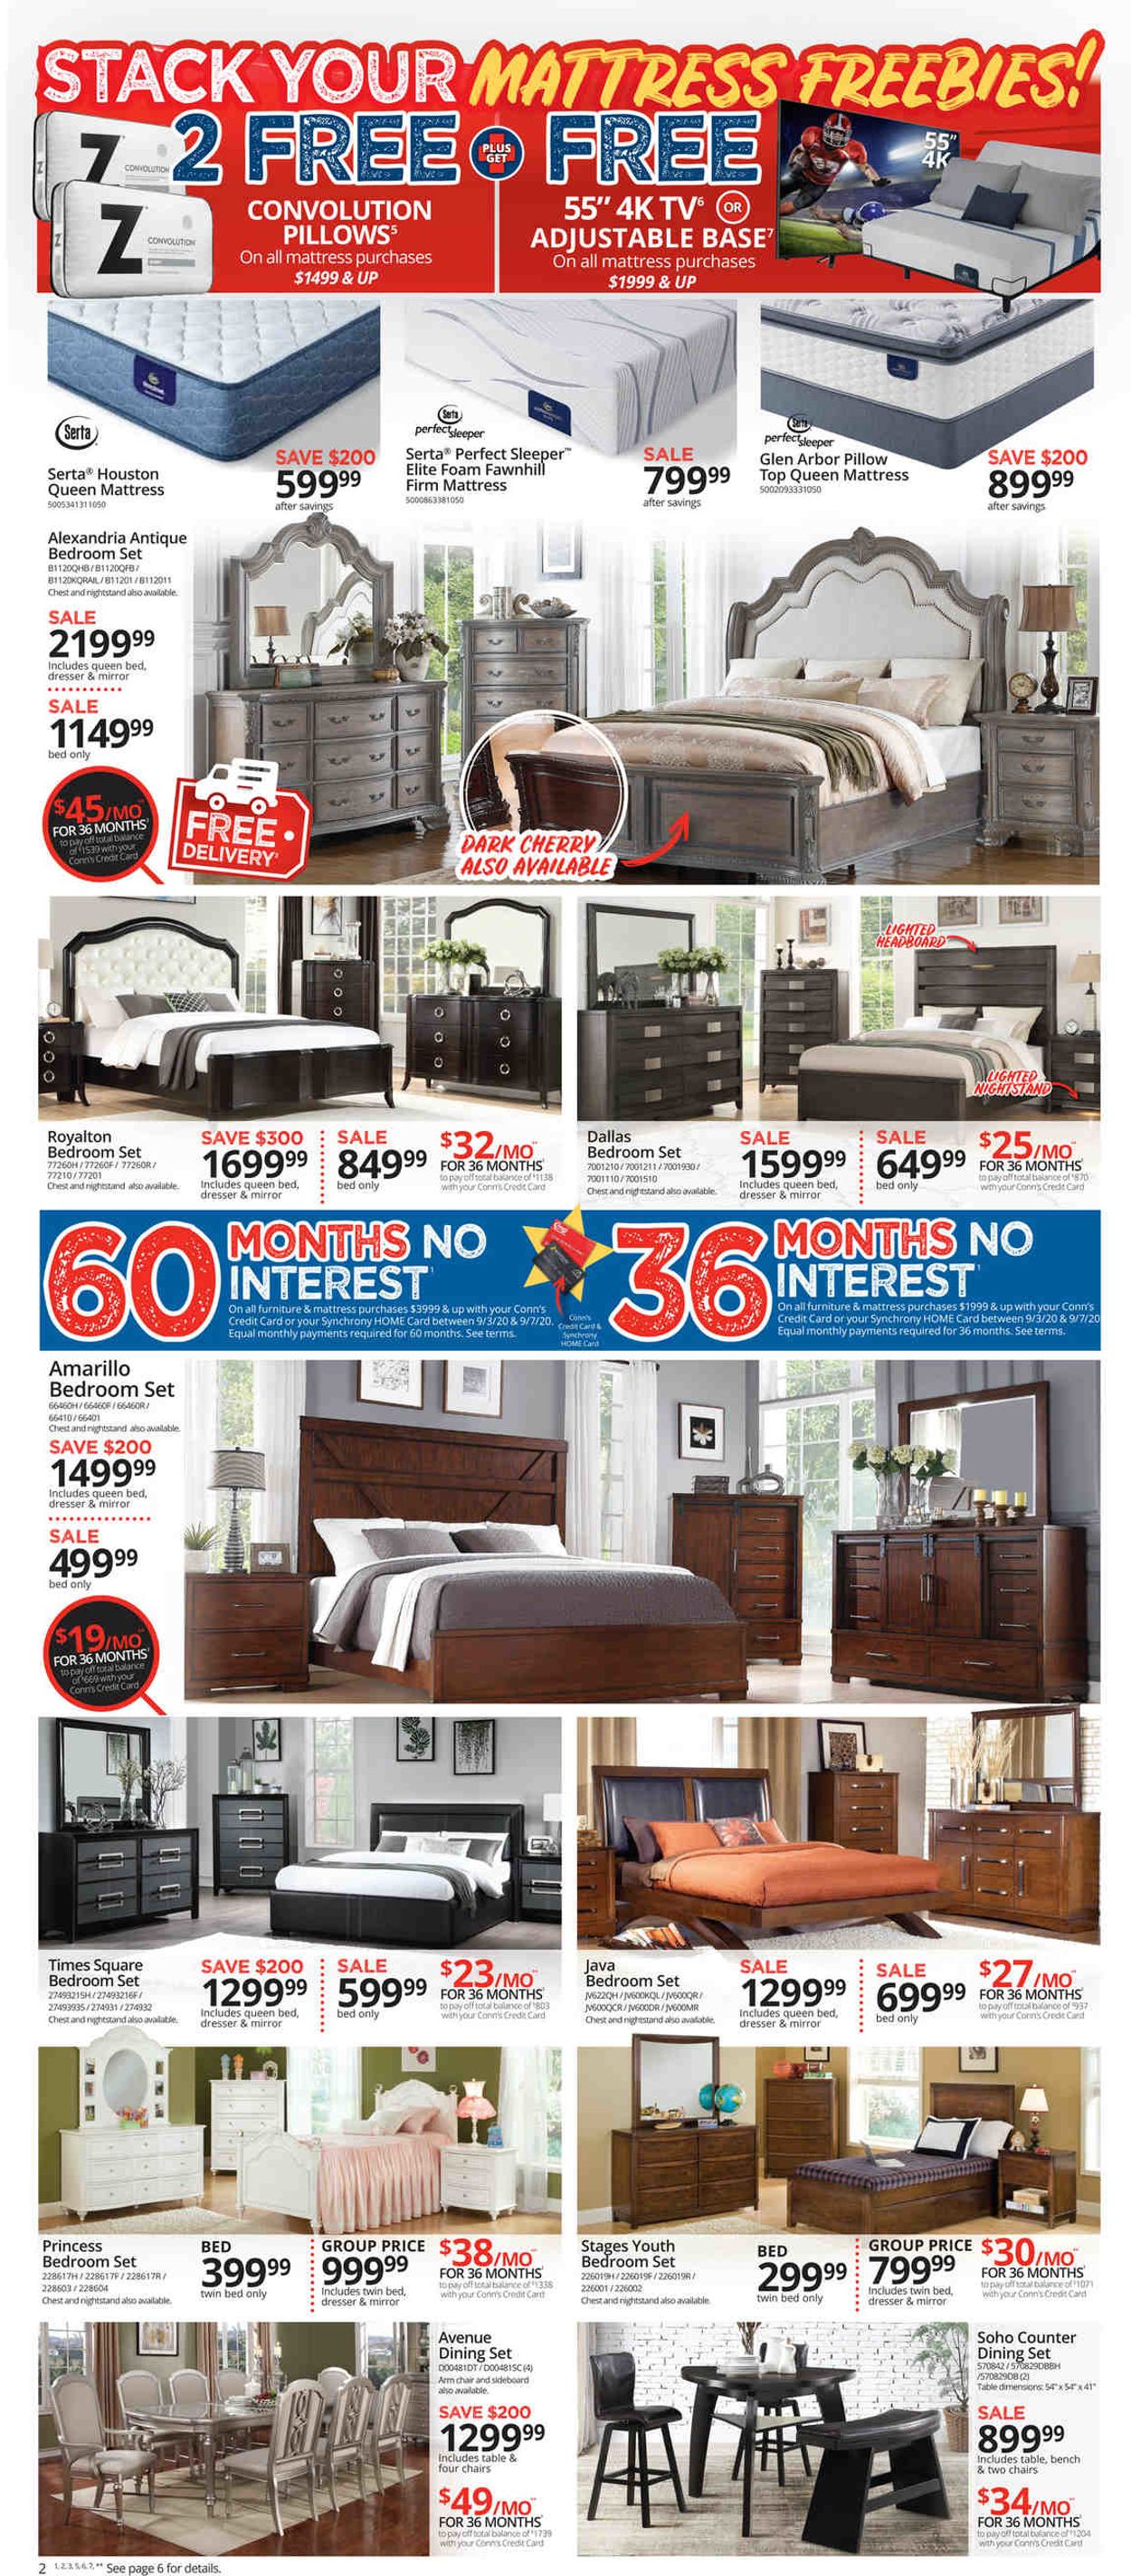 Conn's Home Plus Weekly Ad Circular - valid 09/03-09/07/2020 (Page 2)